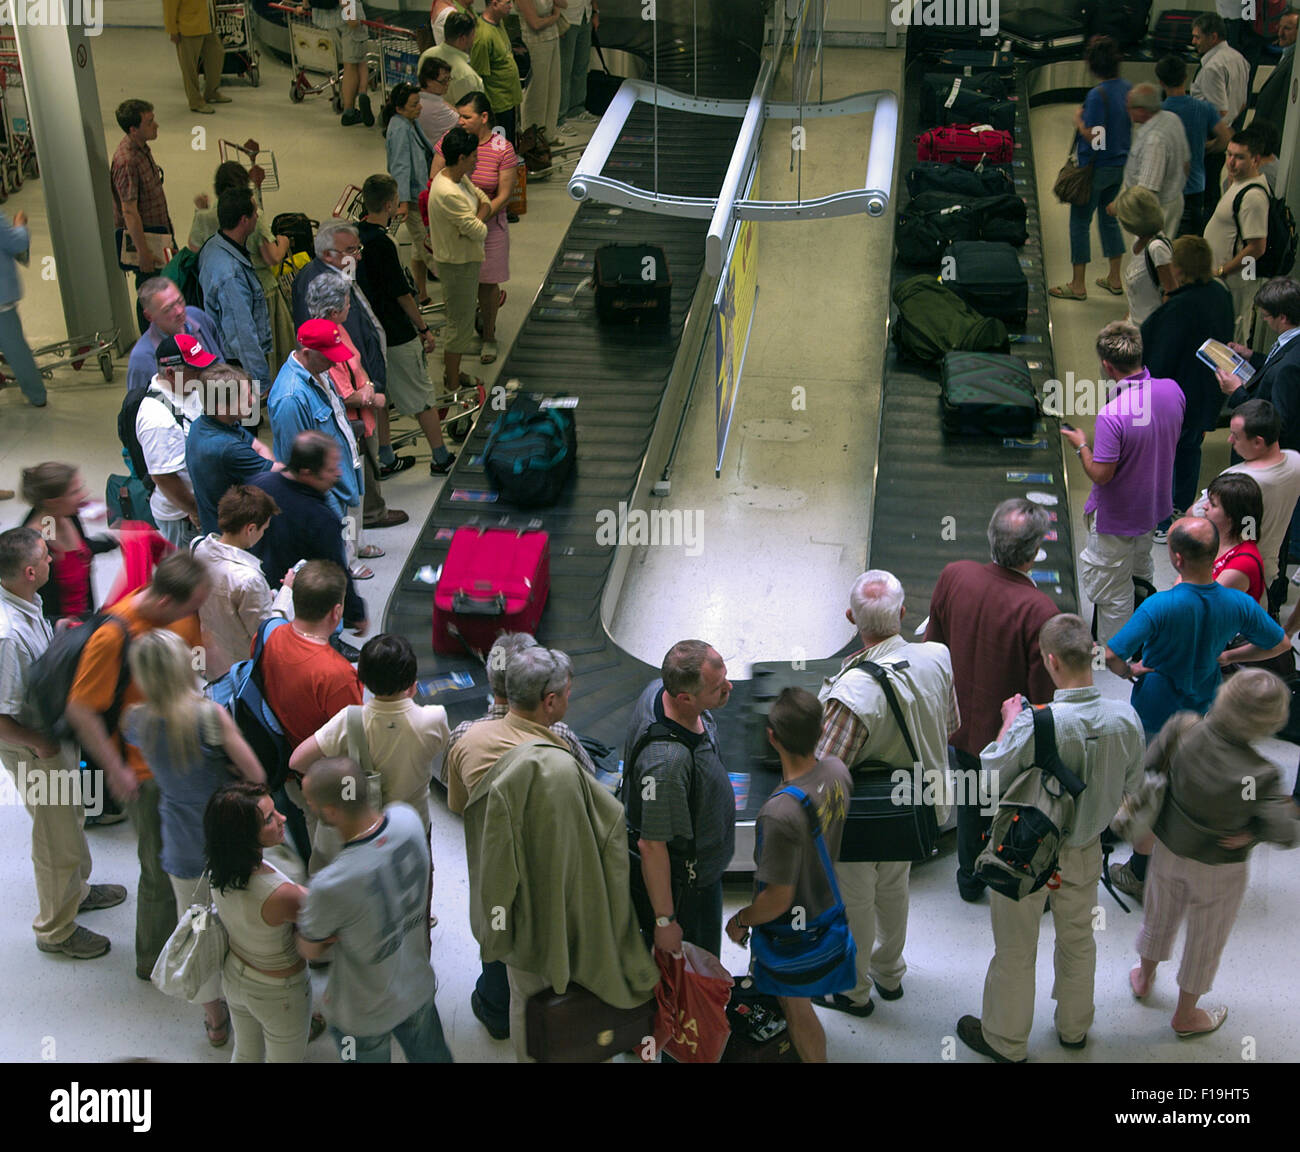 People at the airport waiting for their luggage at the Baggage conveyor belt Stock Photo